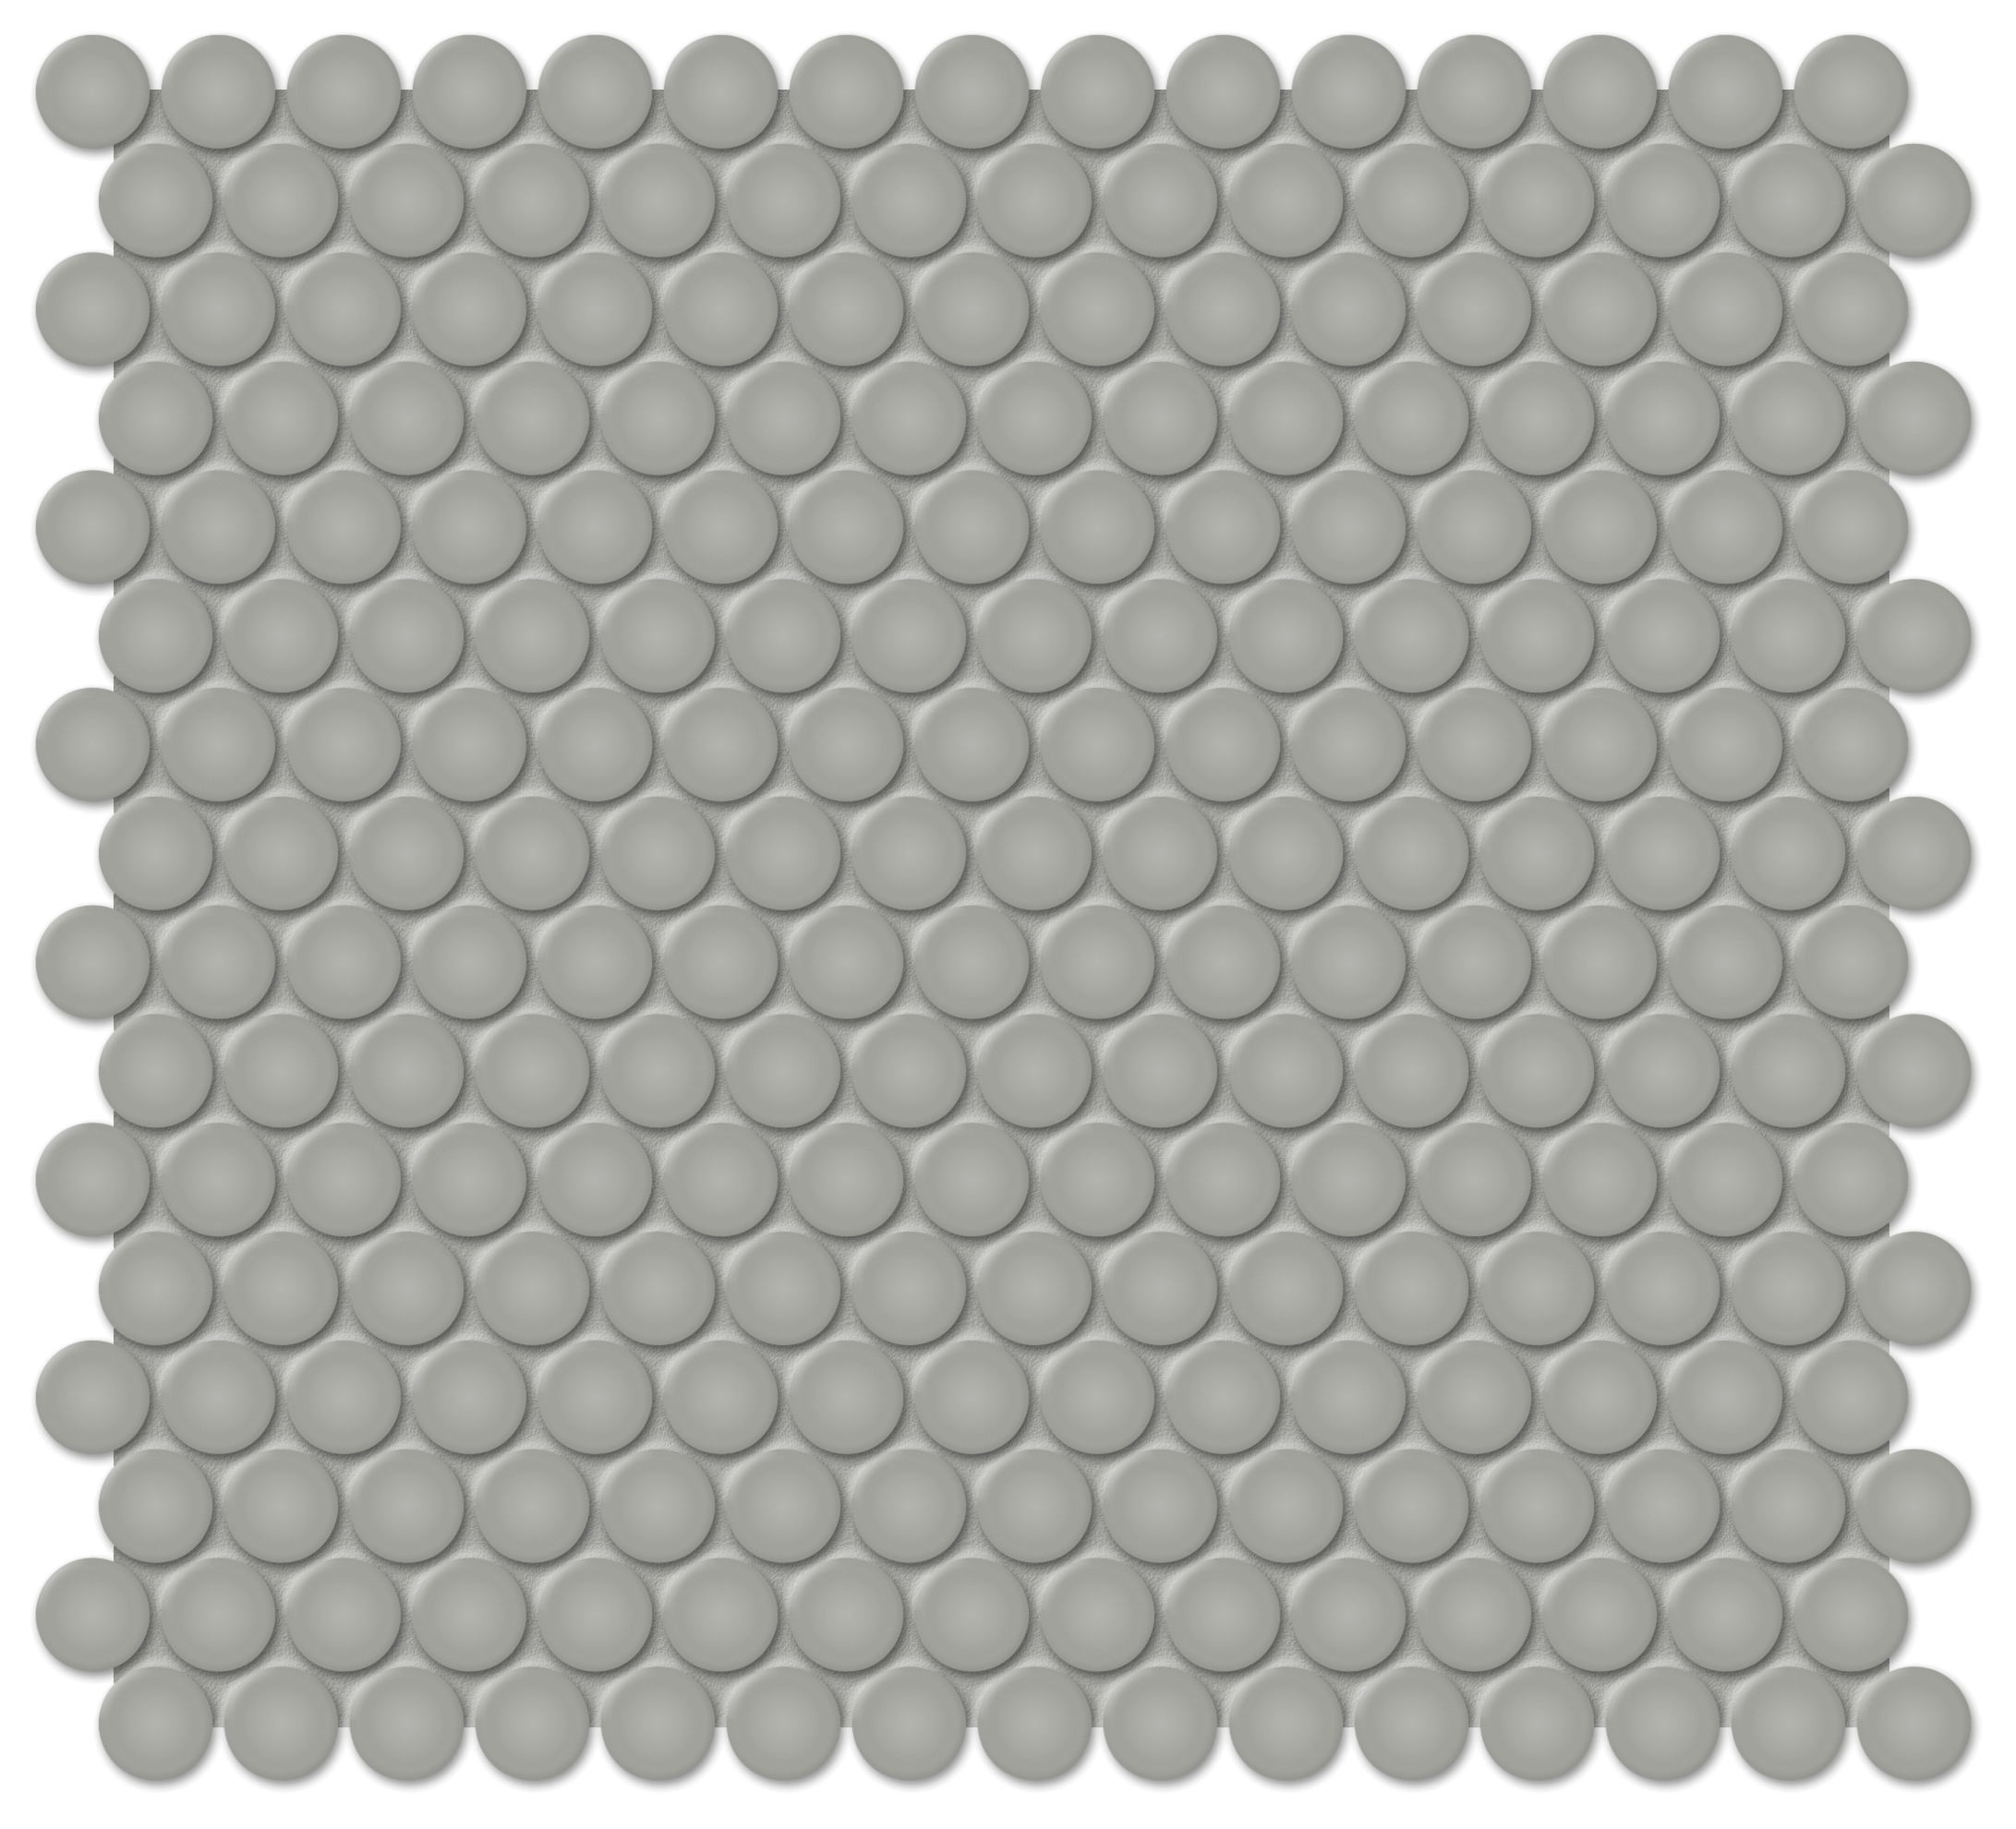 cement chic penny round 3_4-inch pattern glazed porcelain mosaic from soho anatolia collection distributed by surface group international glossy finish pressed edge mesh shape